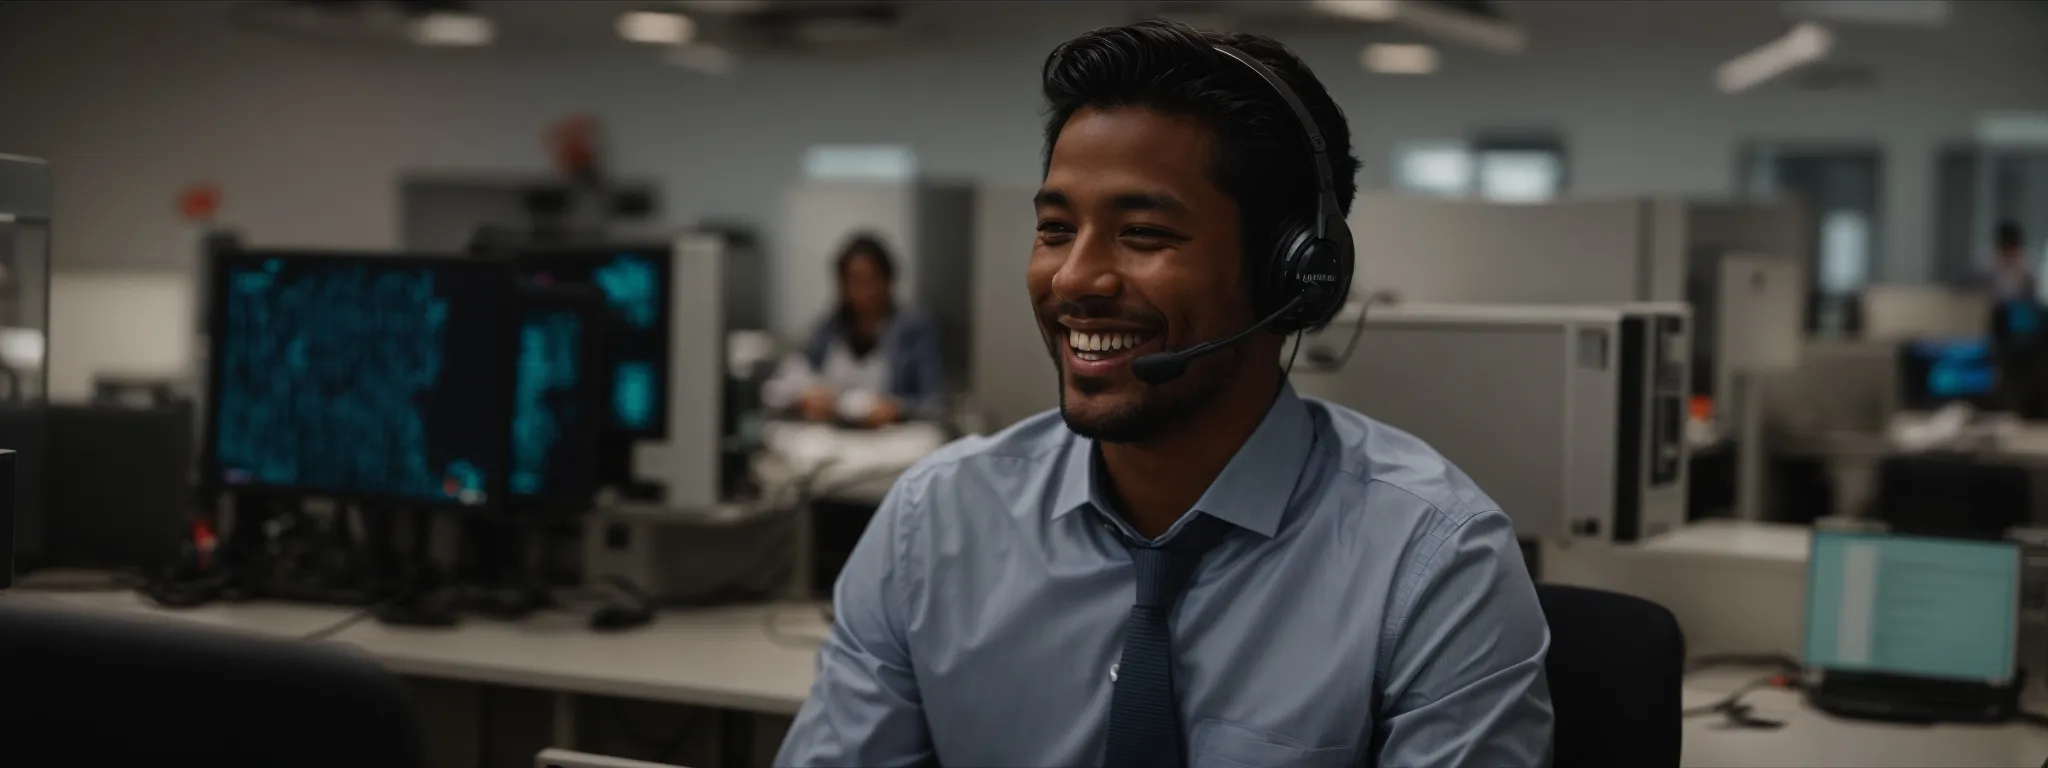 a customer service representative smiling while working on a computer in a clean, modern office environment.